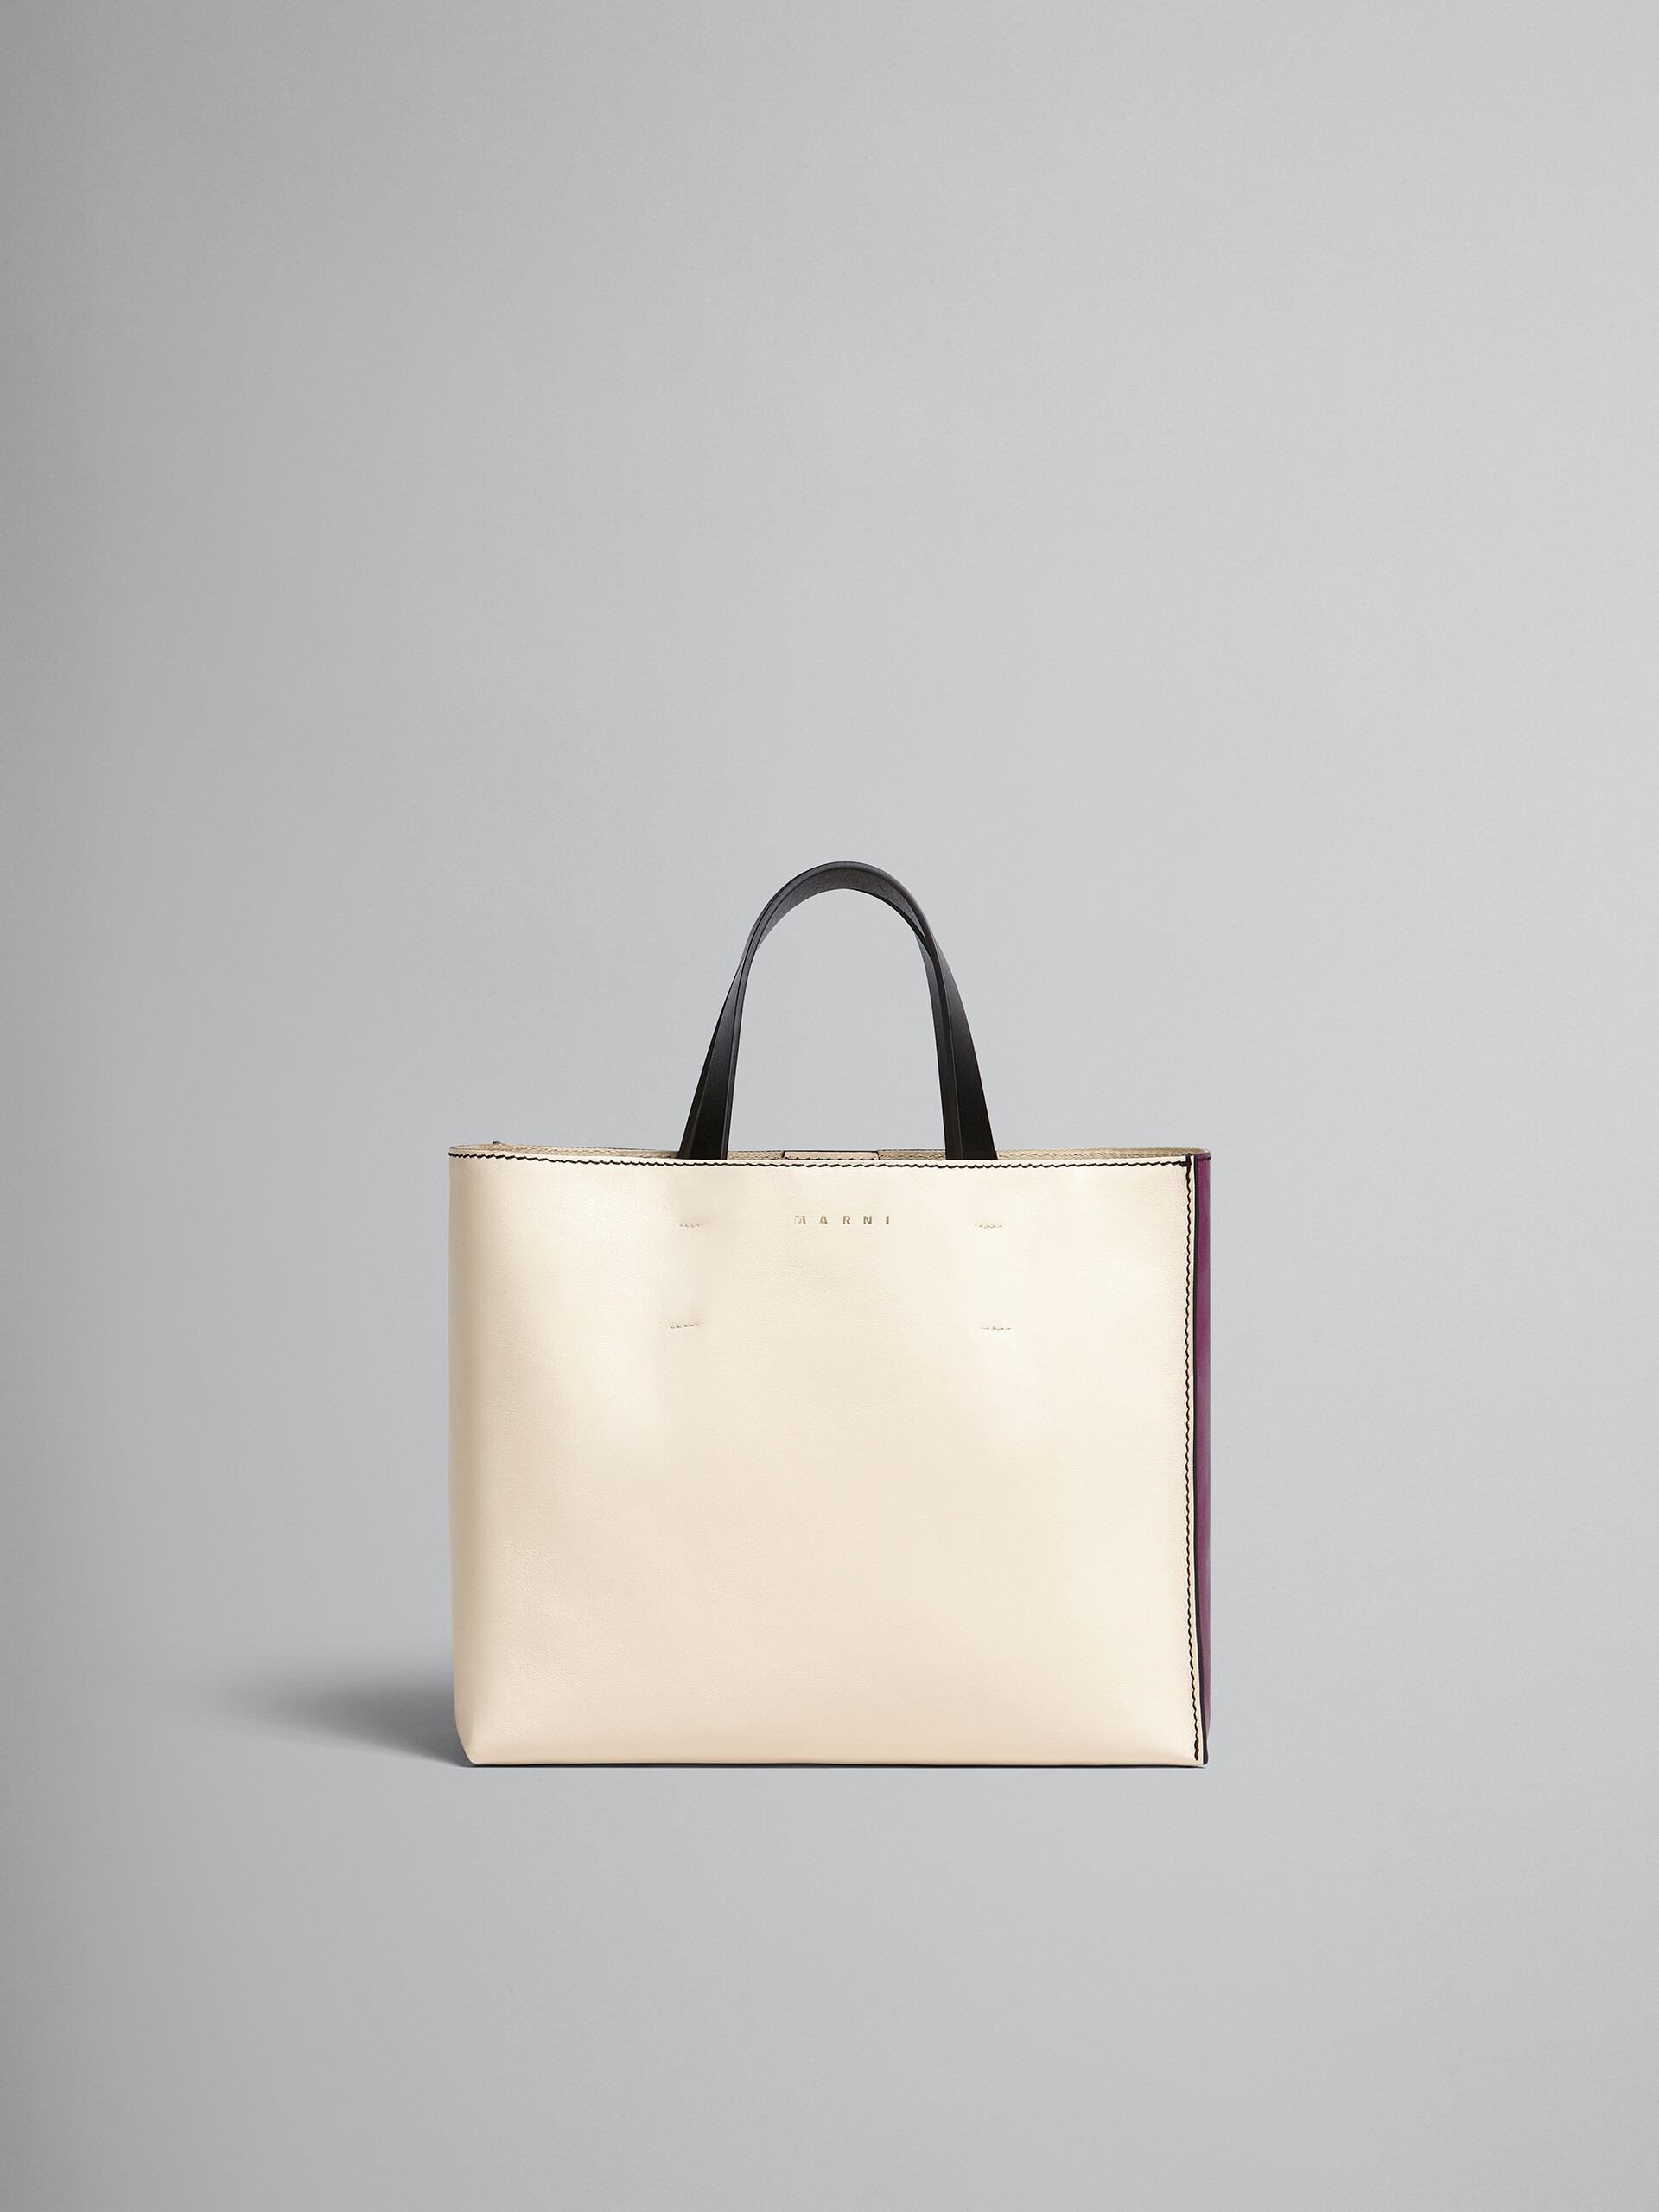 MUSEO SOFT bag in white and purple leather - Shopping Bags - Image 1